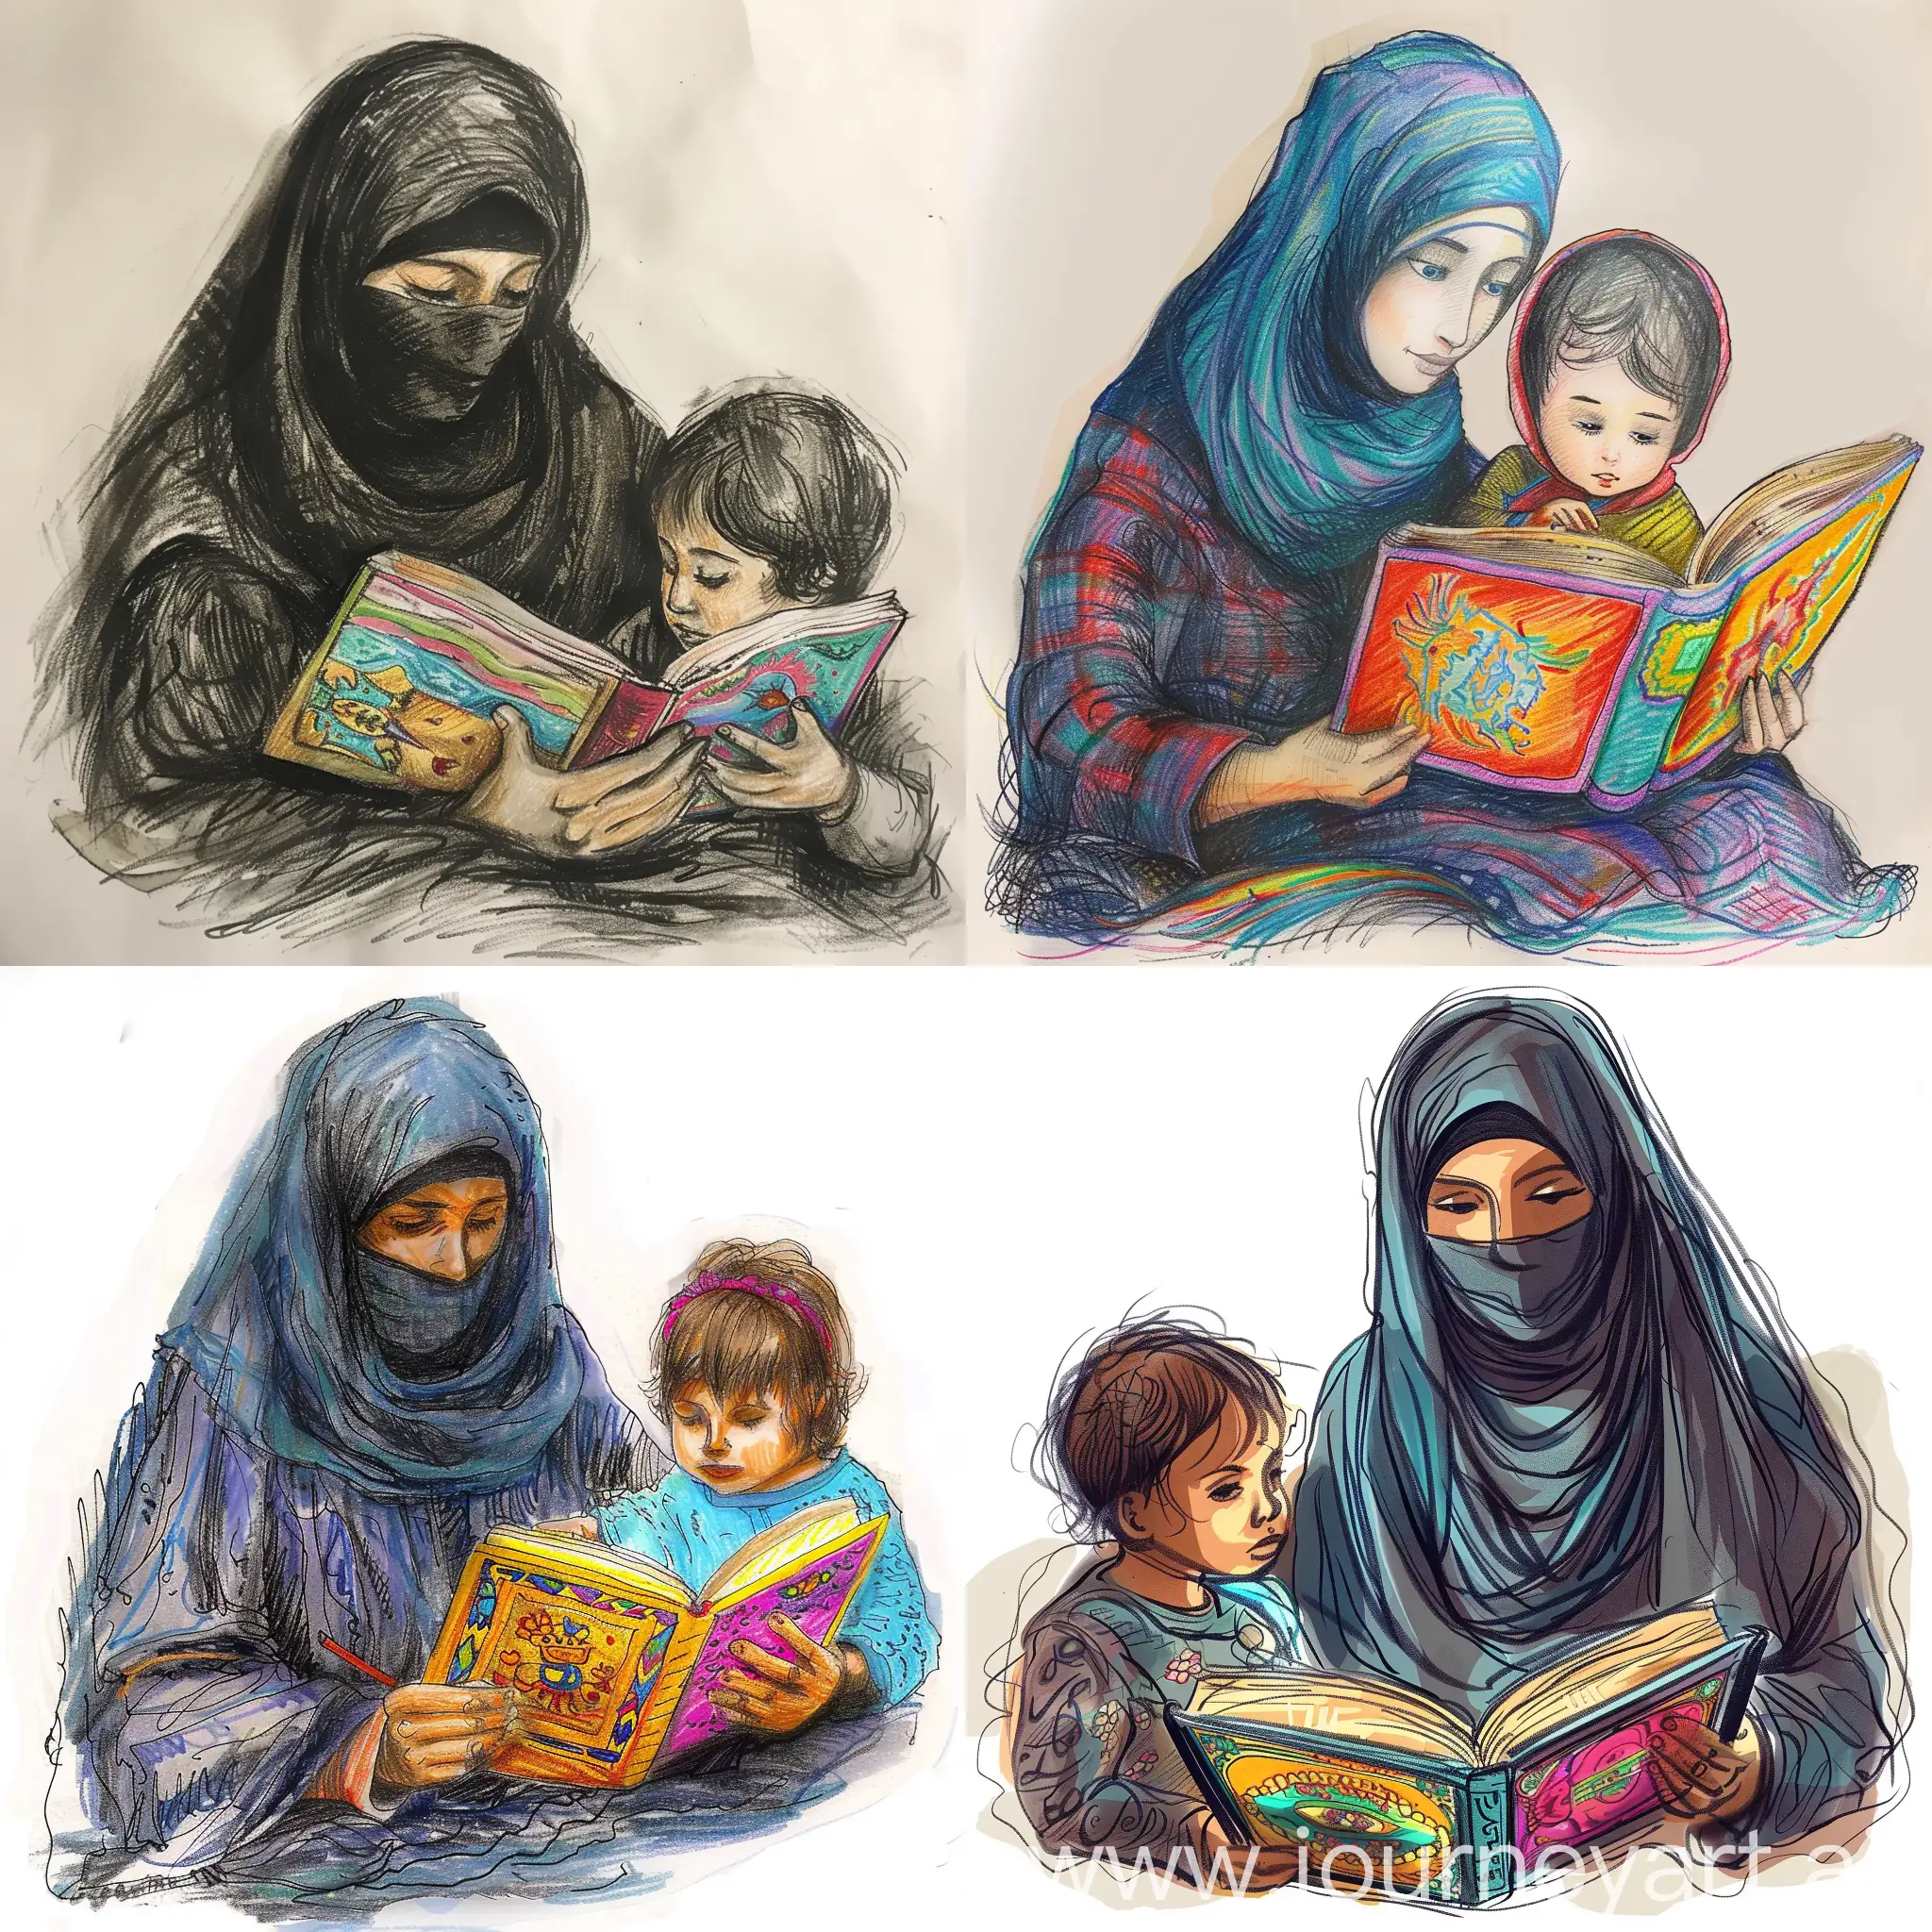 "Draw a veiled woman reading to her child from a colorful book."